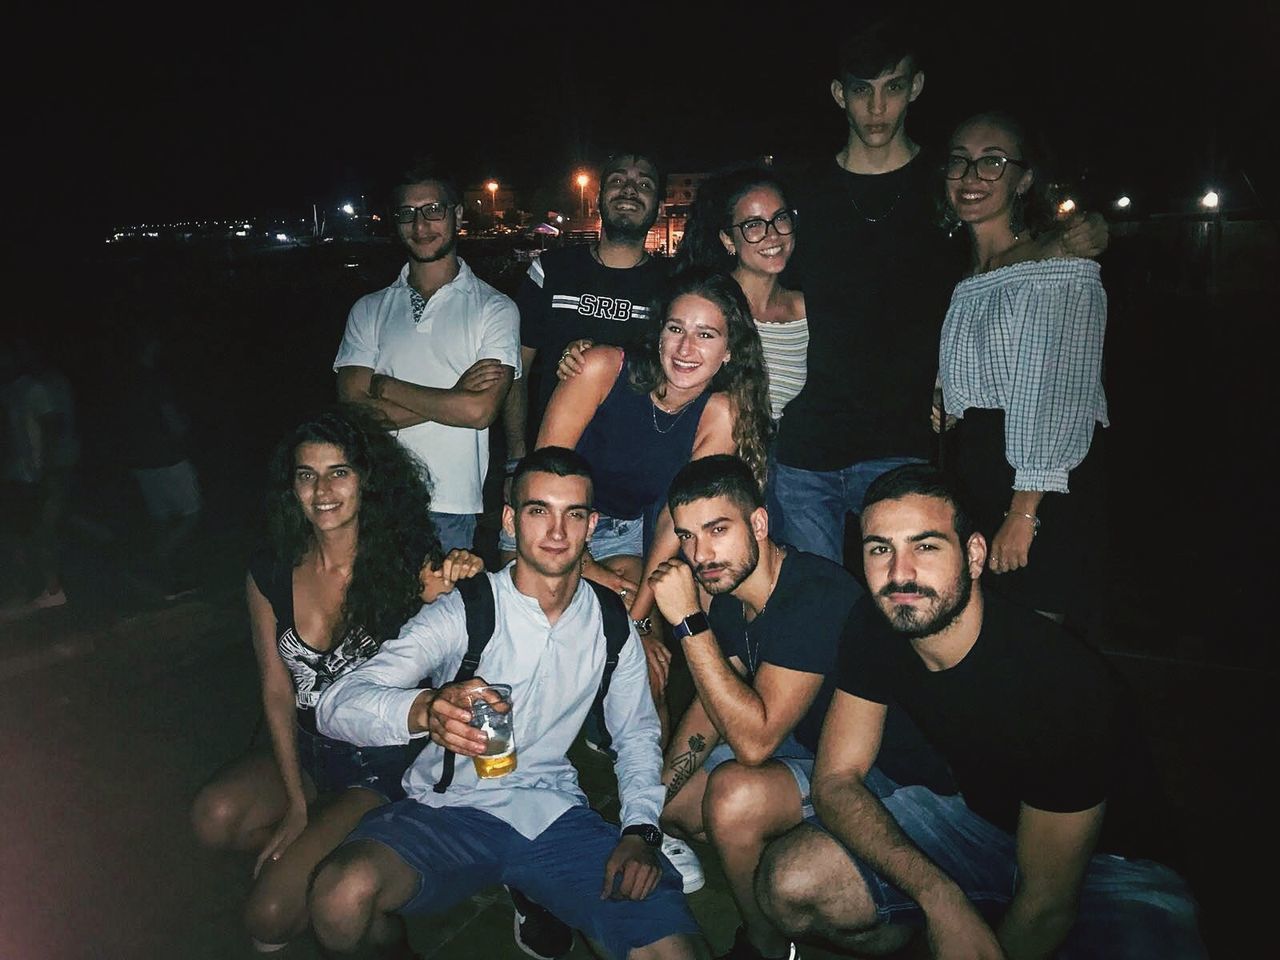 young adult, young men, group of people, young women, sitting, casual clothing, real people, night, leisure activity, togetherness, front view, lifestyles, smiling, men, people, happiness, friendship, illuminated, nightlife